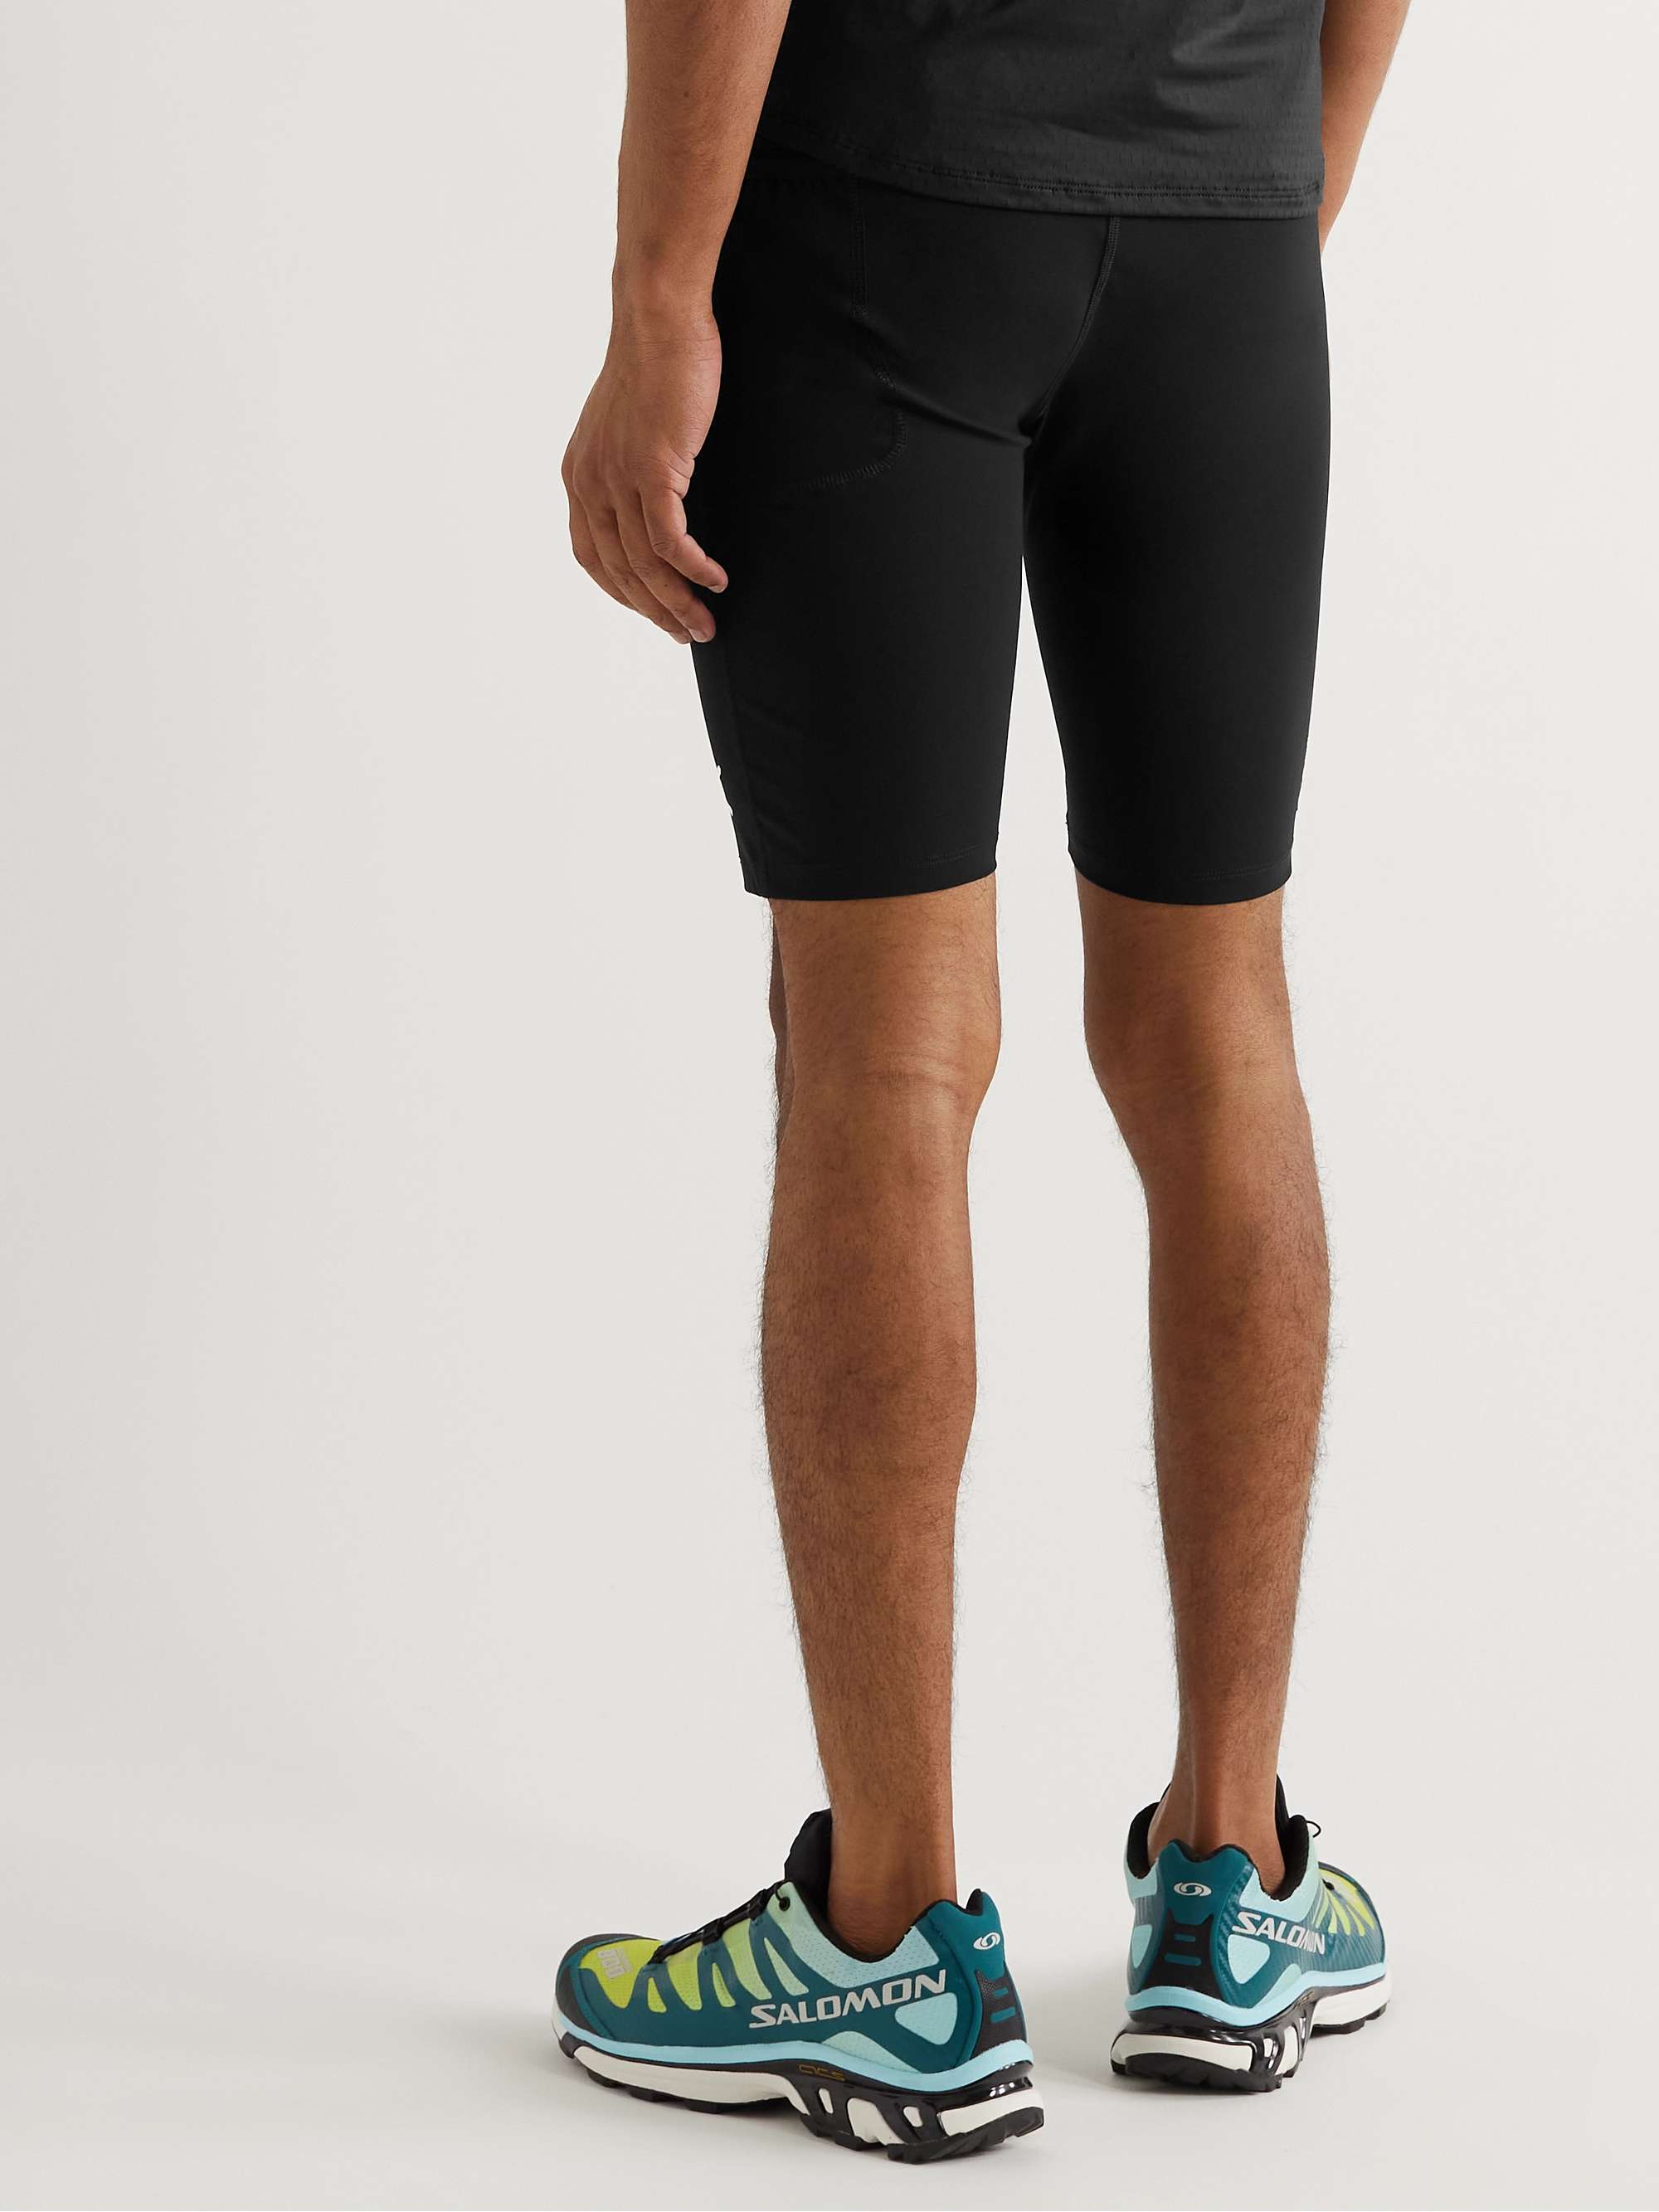 DISTRICT VISION TomTom Speed Tight Stretch Tech-Shell Running Shorts